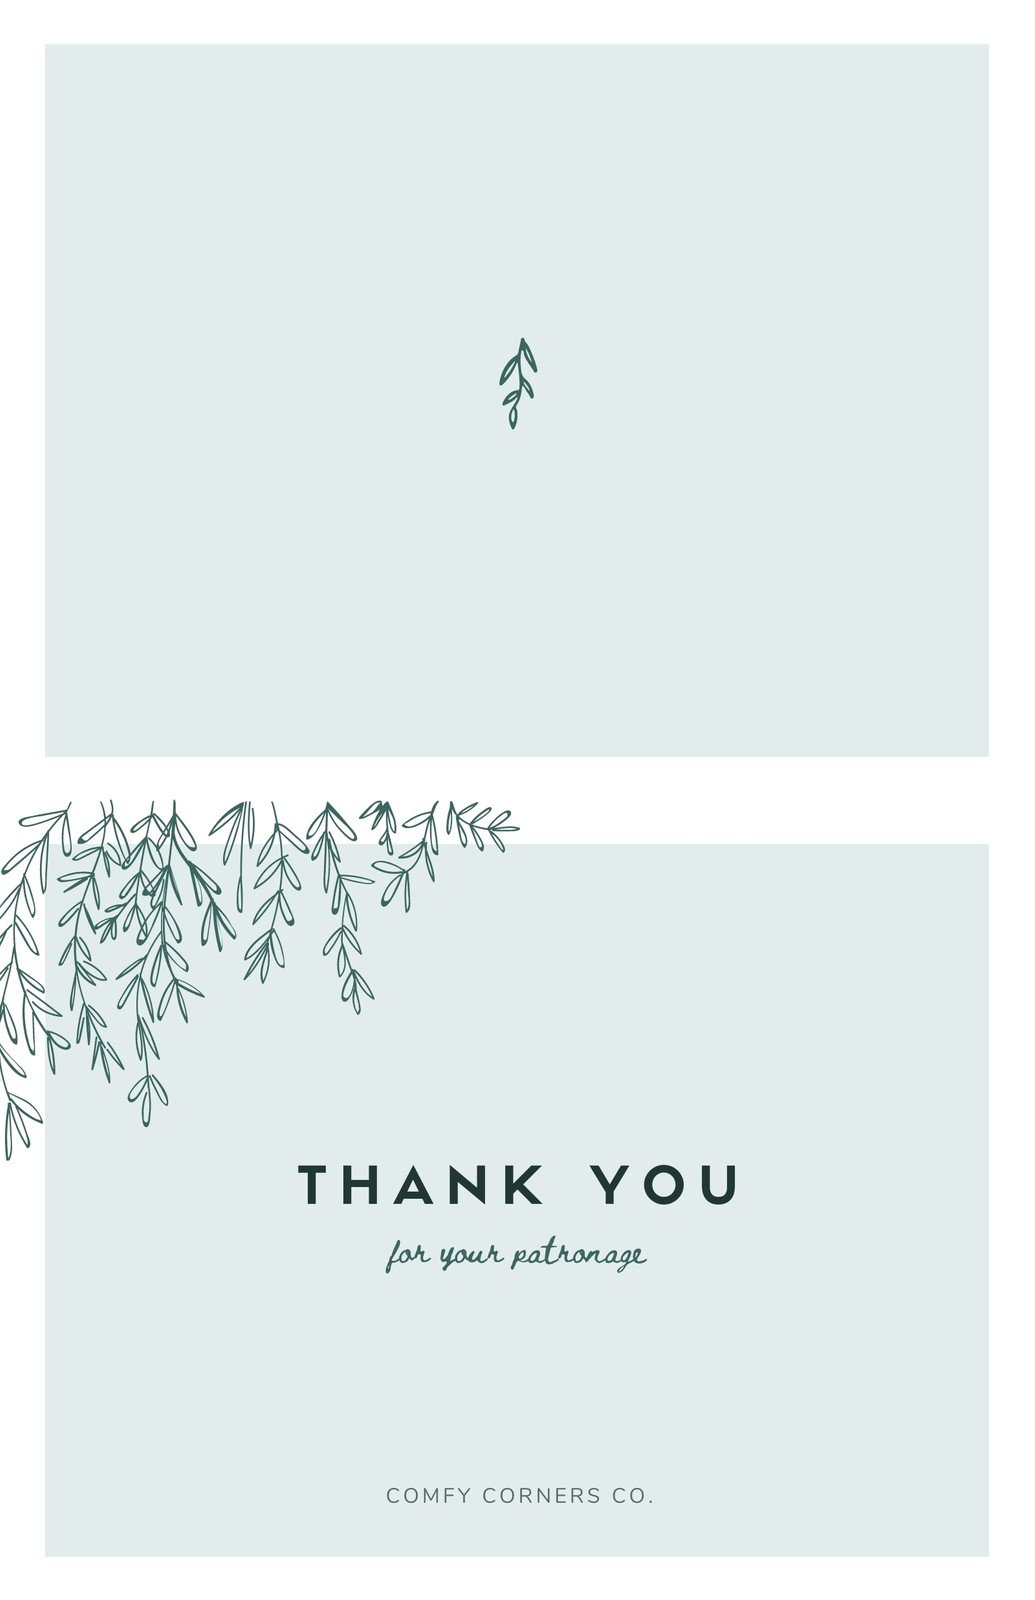 https://marketplace.canva.com/EAEQMwn-4i8/2/0/1035w/canva-green-vines-business-thank-you-folded-note-card-4KAVfmqyyxI.jpg